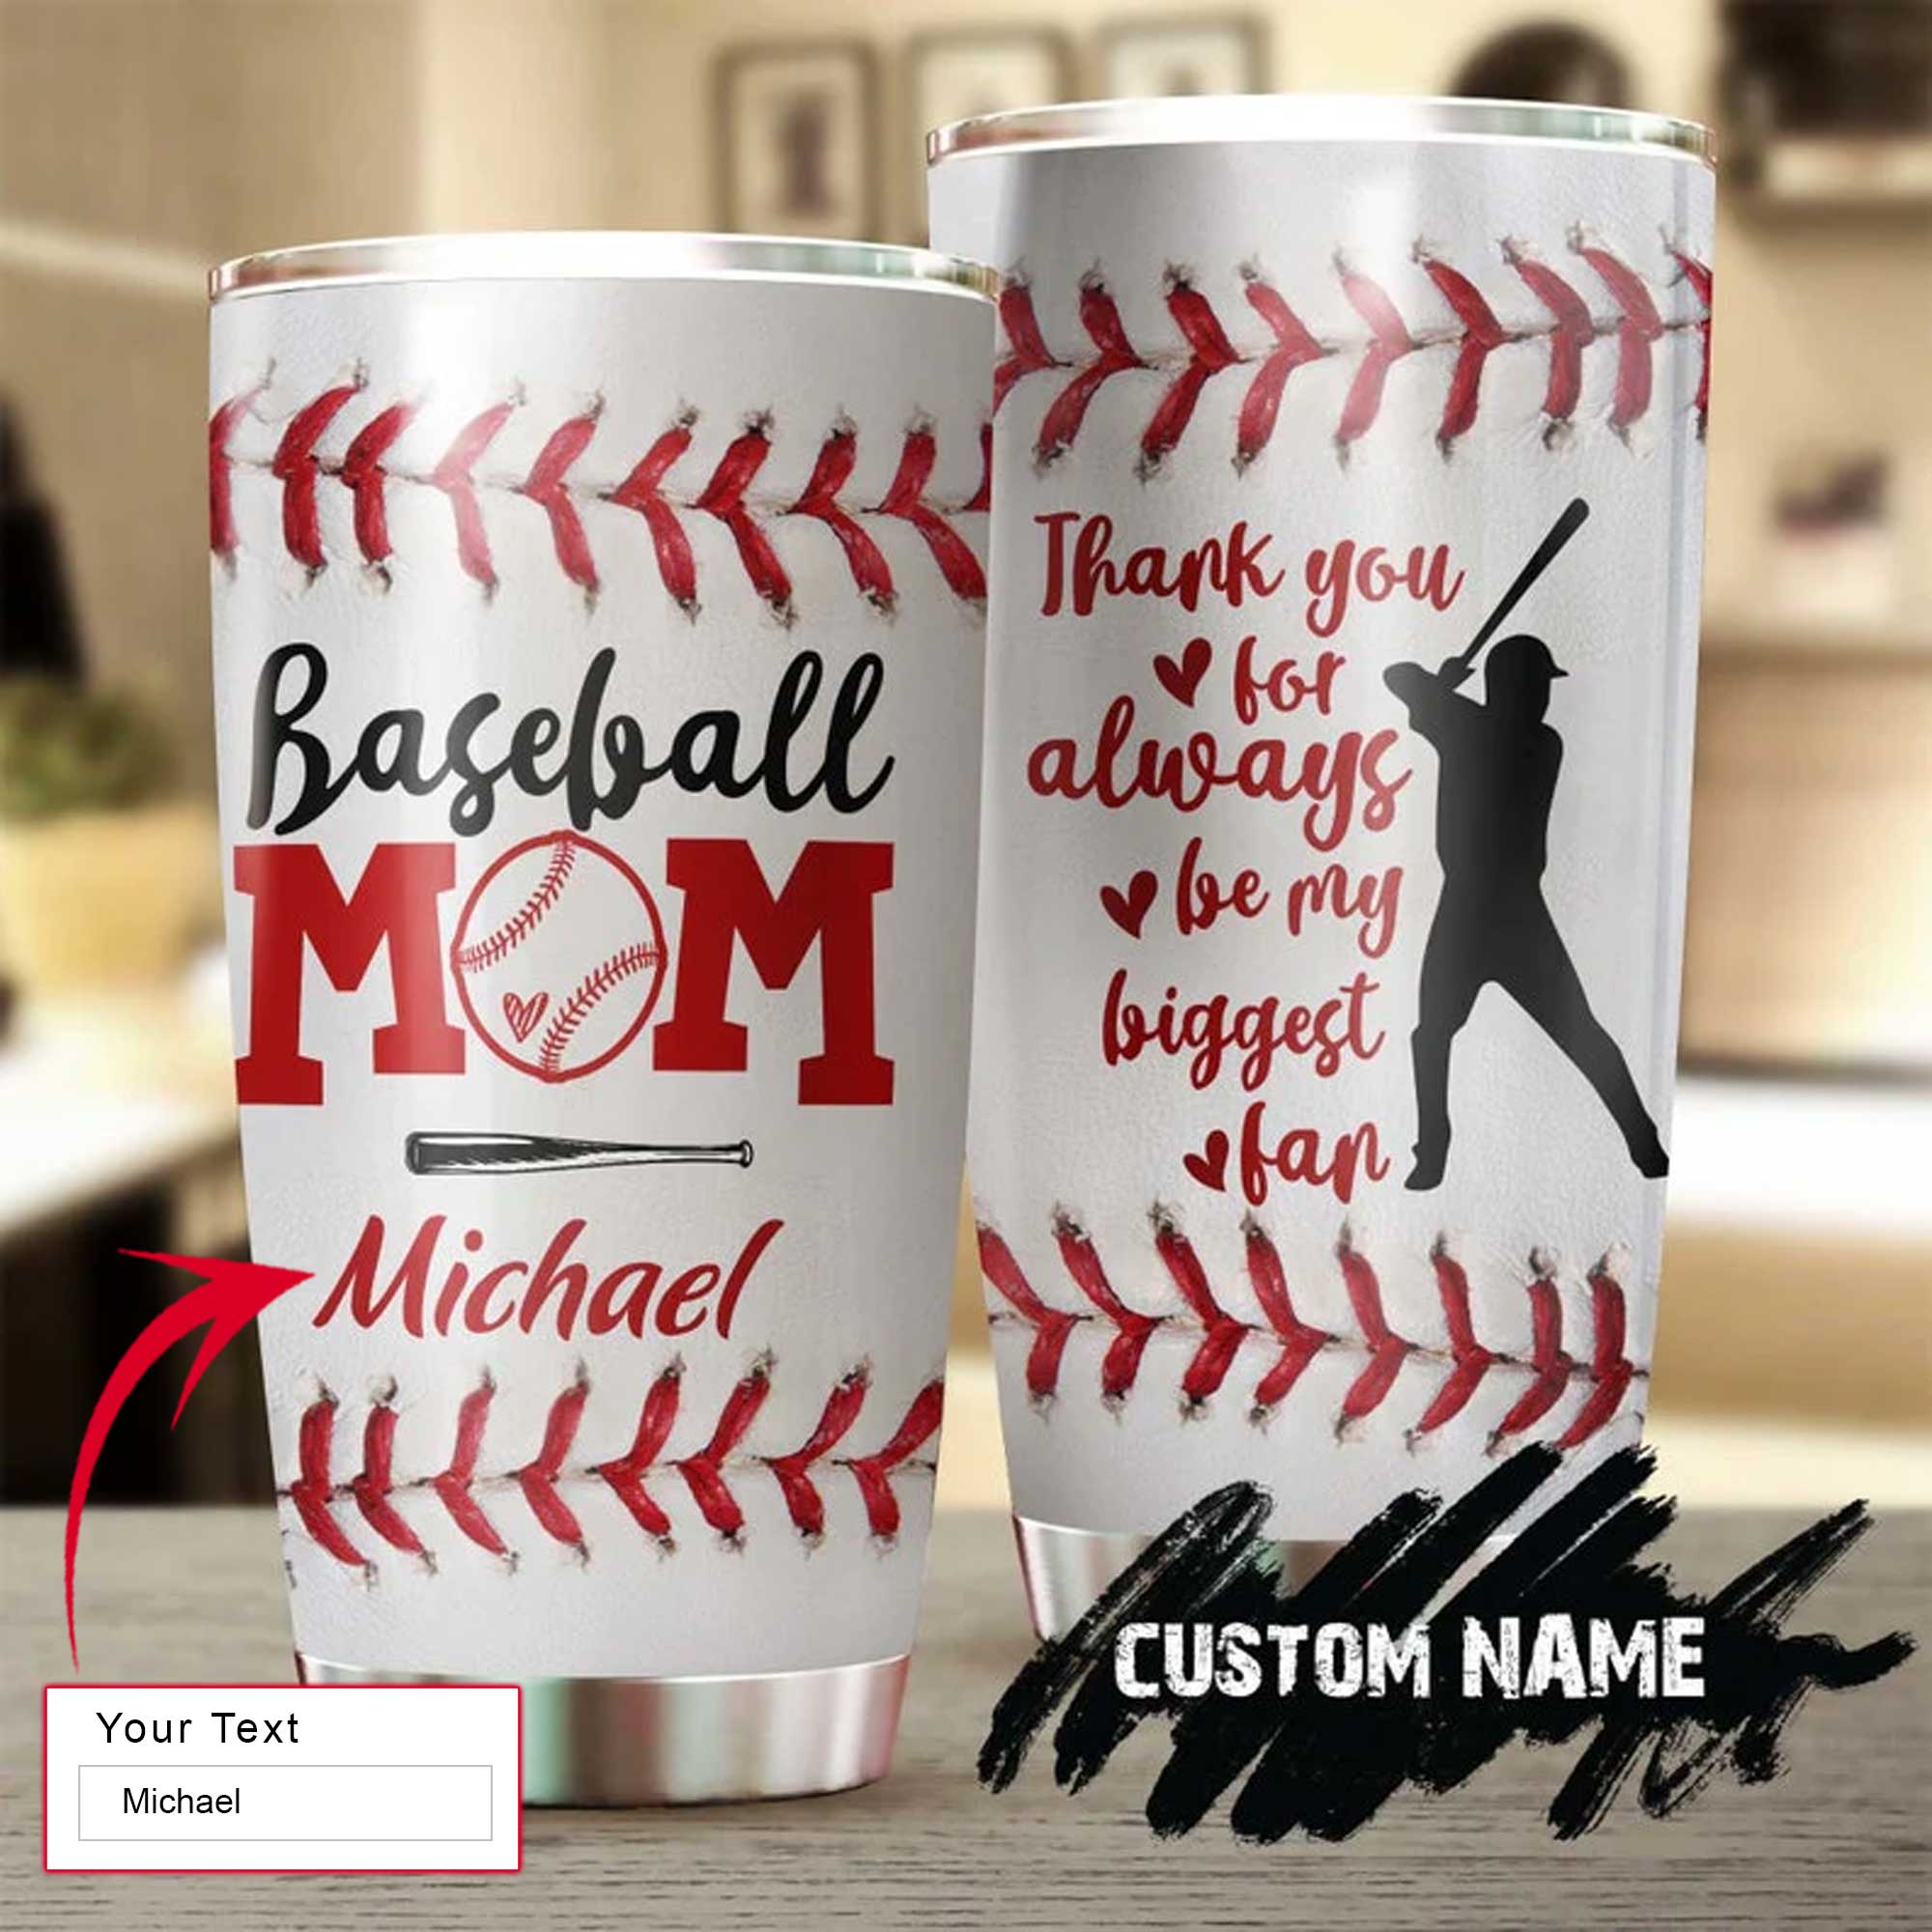 Personalized Mother's Day Gift Tumbler - Custom Gift For Mother's Day, Presents For Mom-Baseball Mom Thank You For Always Being My Biggest Fan Tumbler